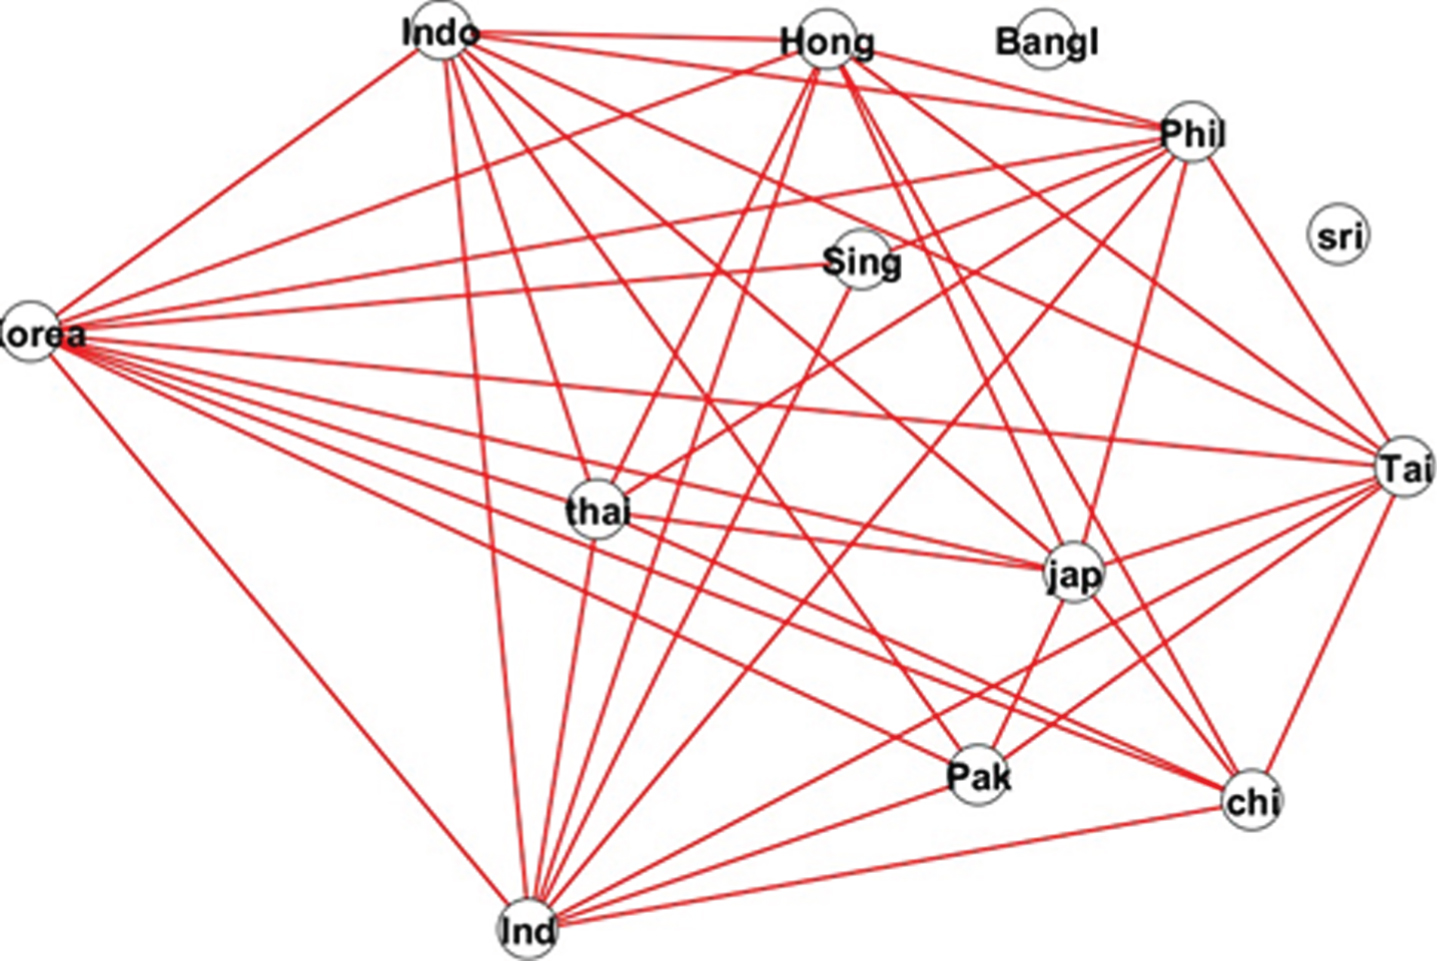 Network of Asian Stock Markets in Pre-Crisis Period.